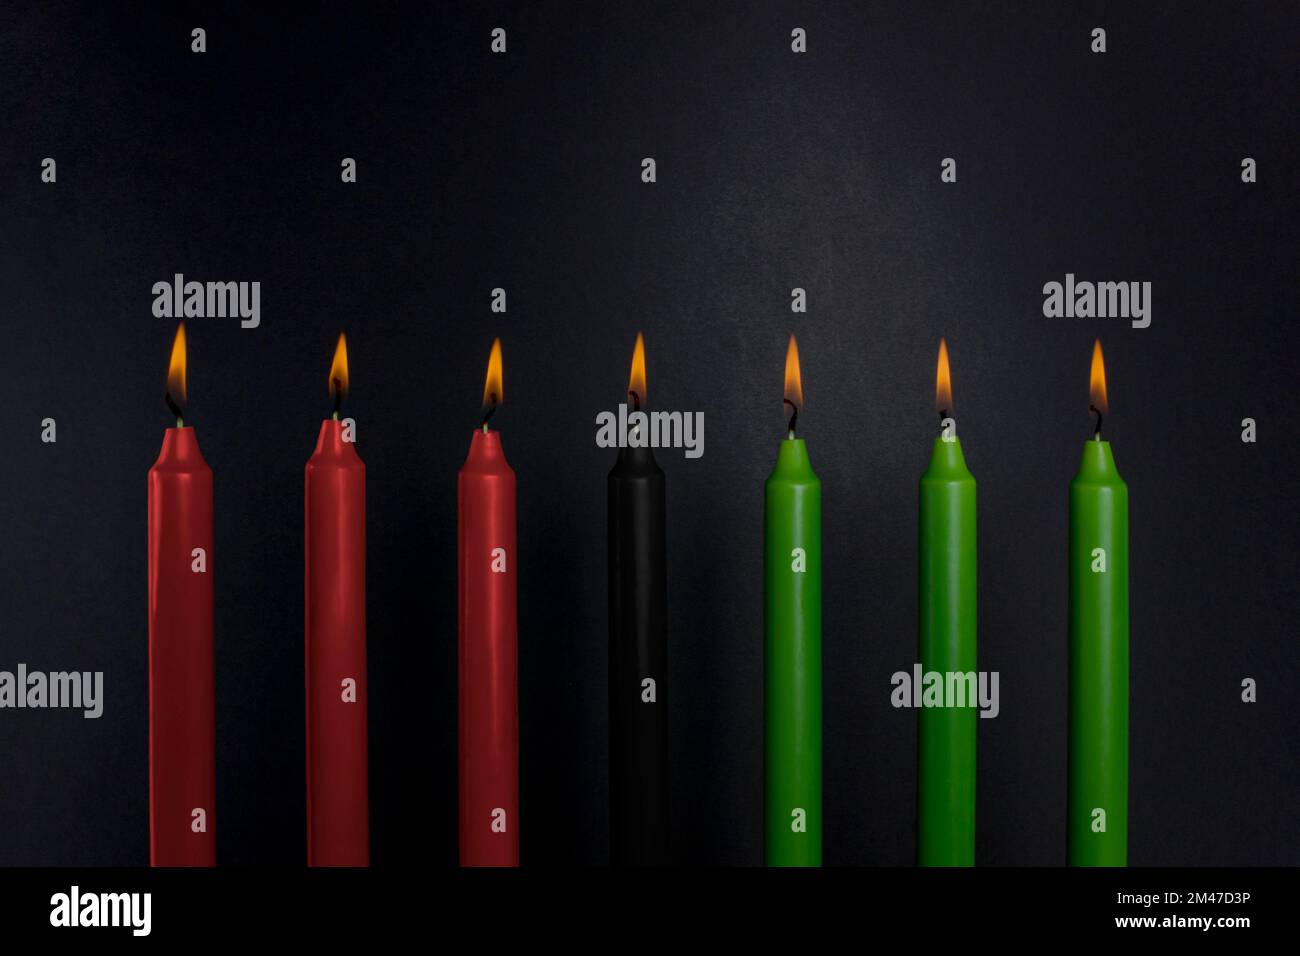 Kwanzaa holiday hi-res stock photography and images - Page 4 - Alamy